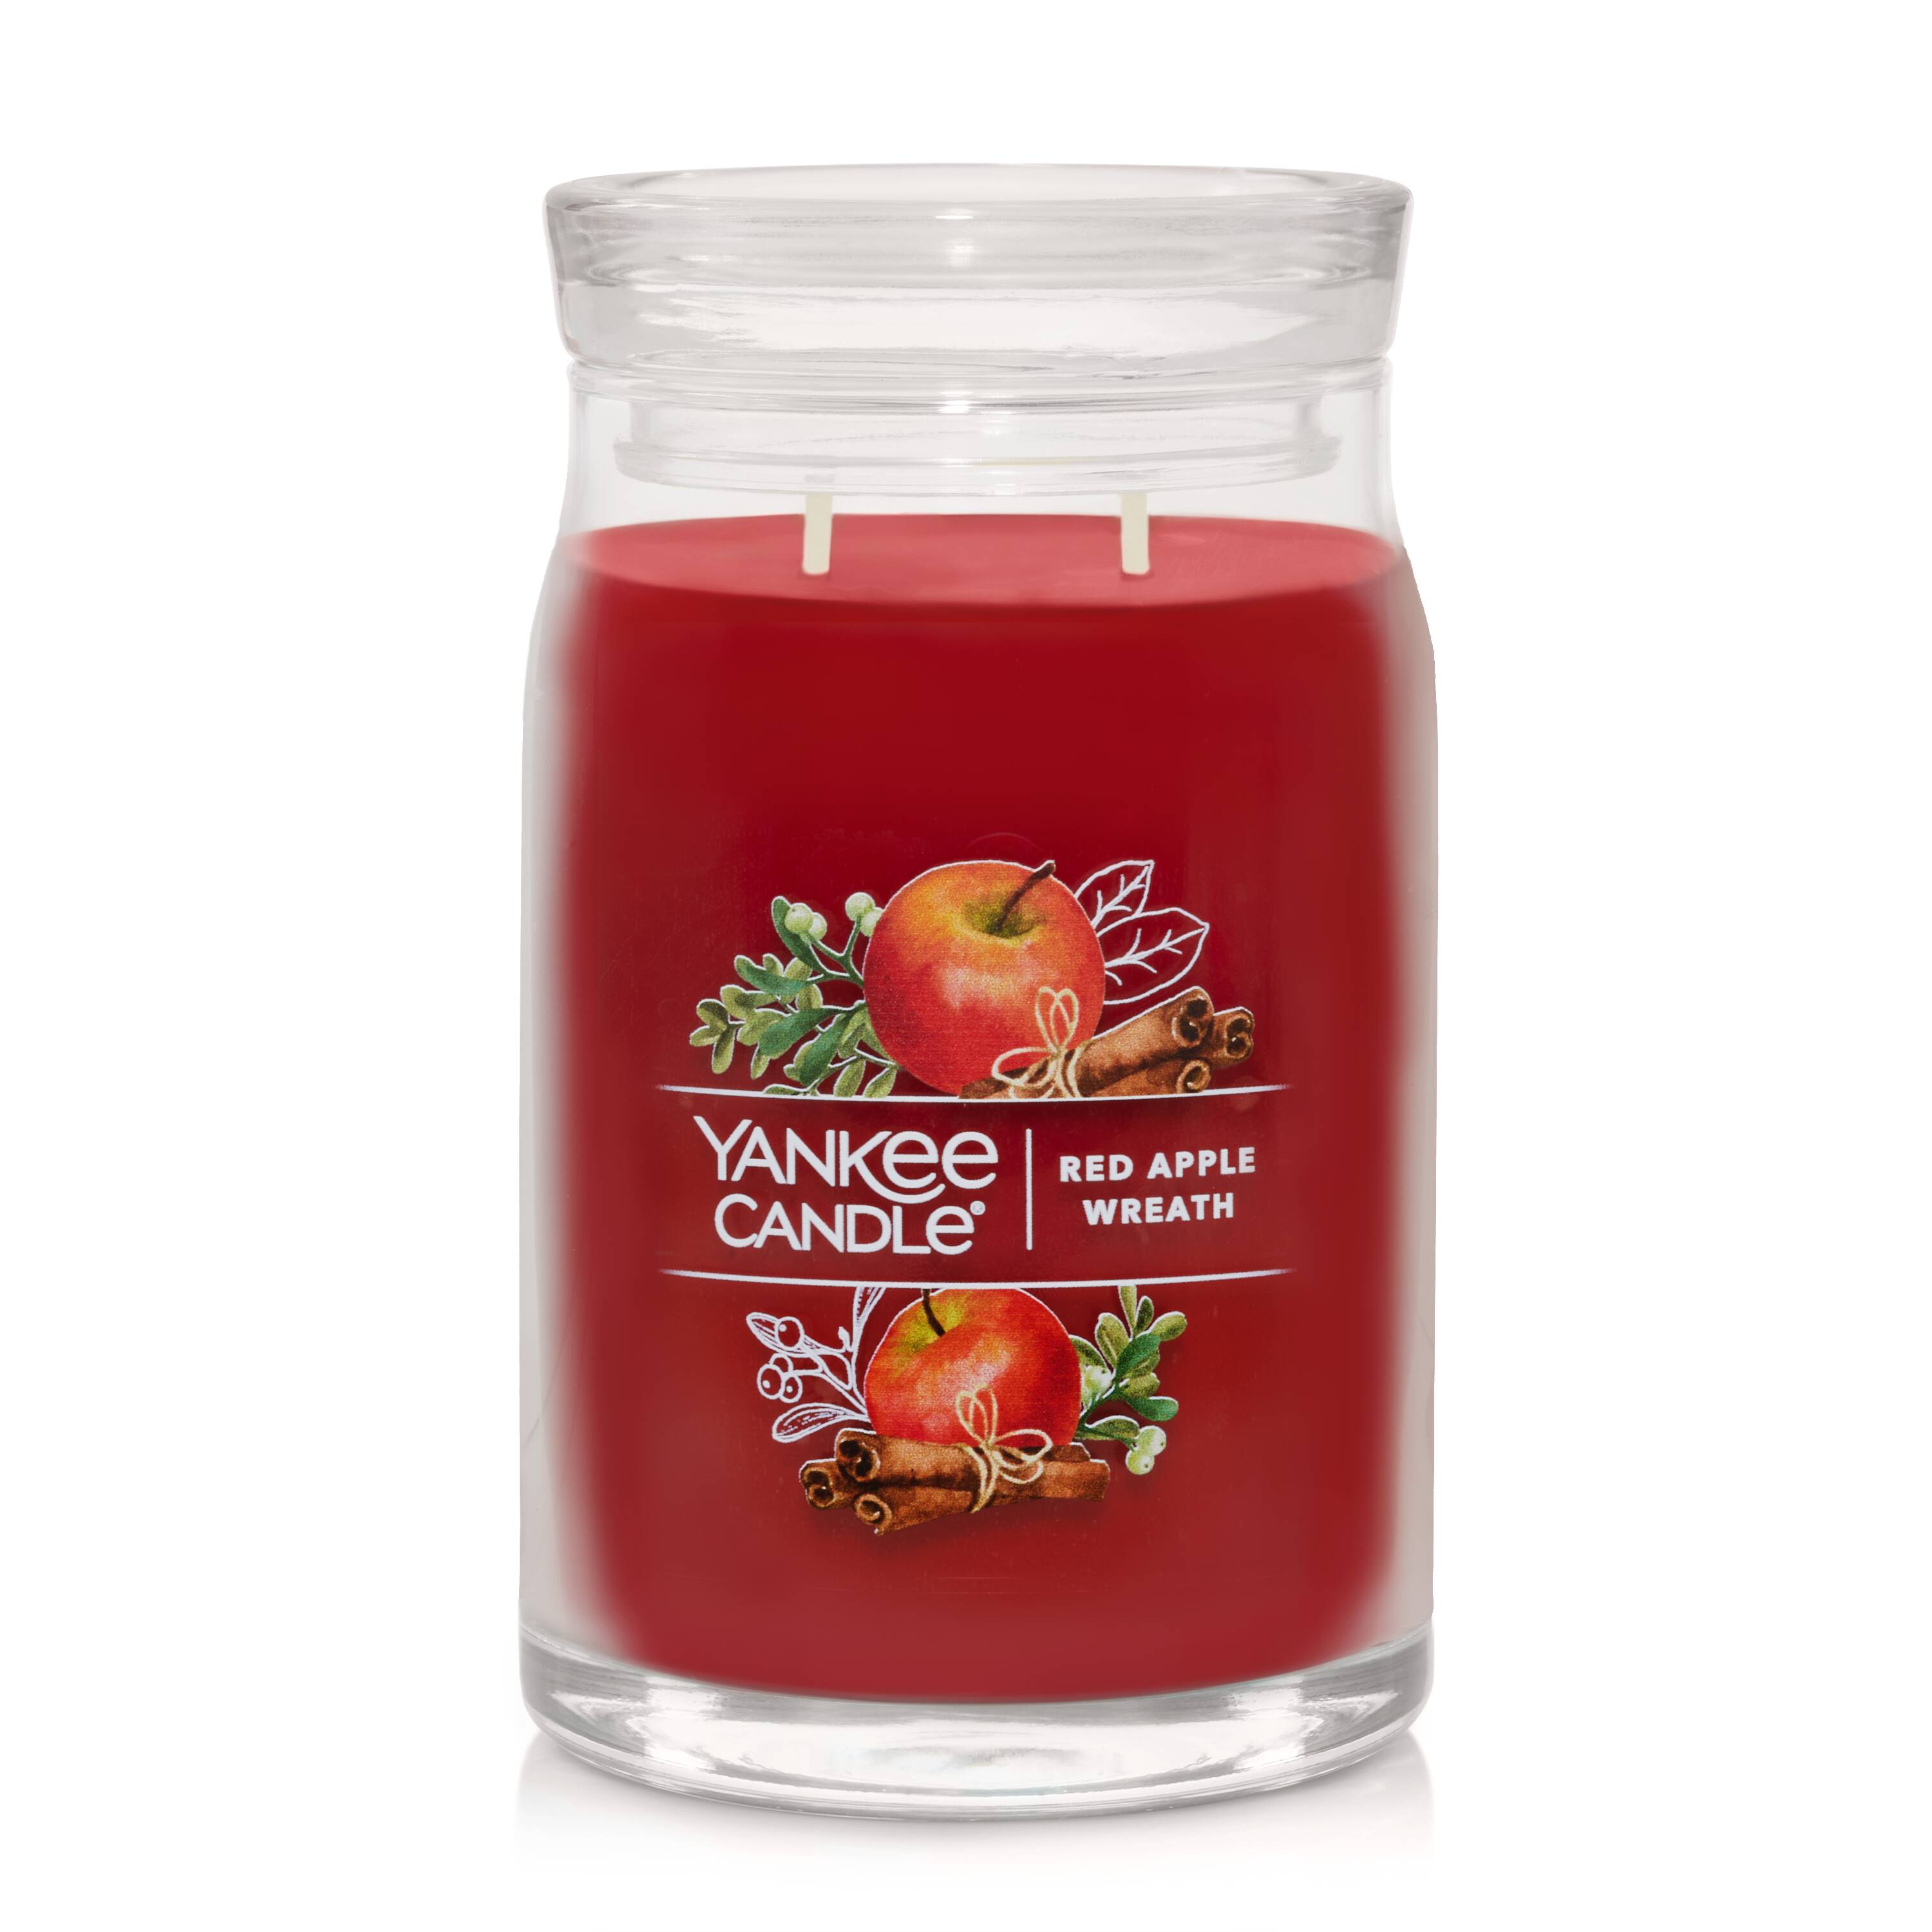 MINI 3 Red F*#kin' Melon Pop Jar Candle, 4oz Aromatic Home Series, by